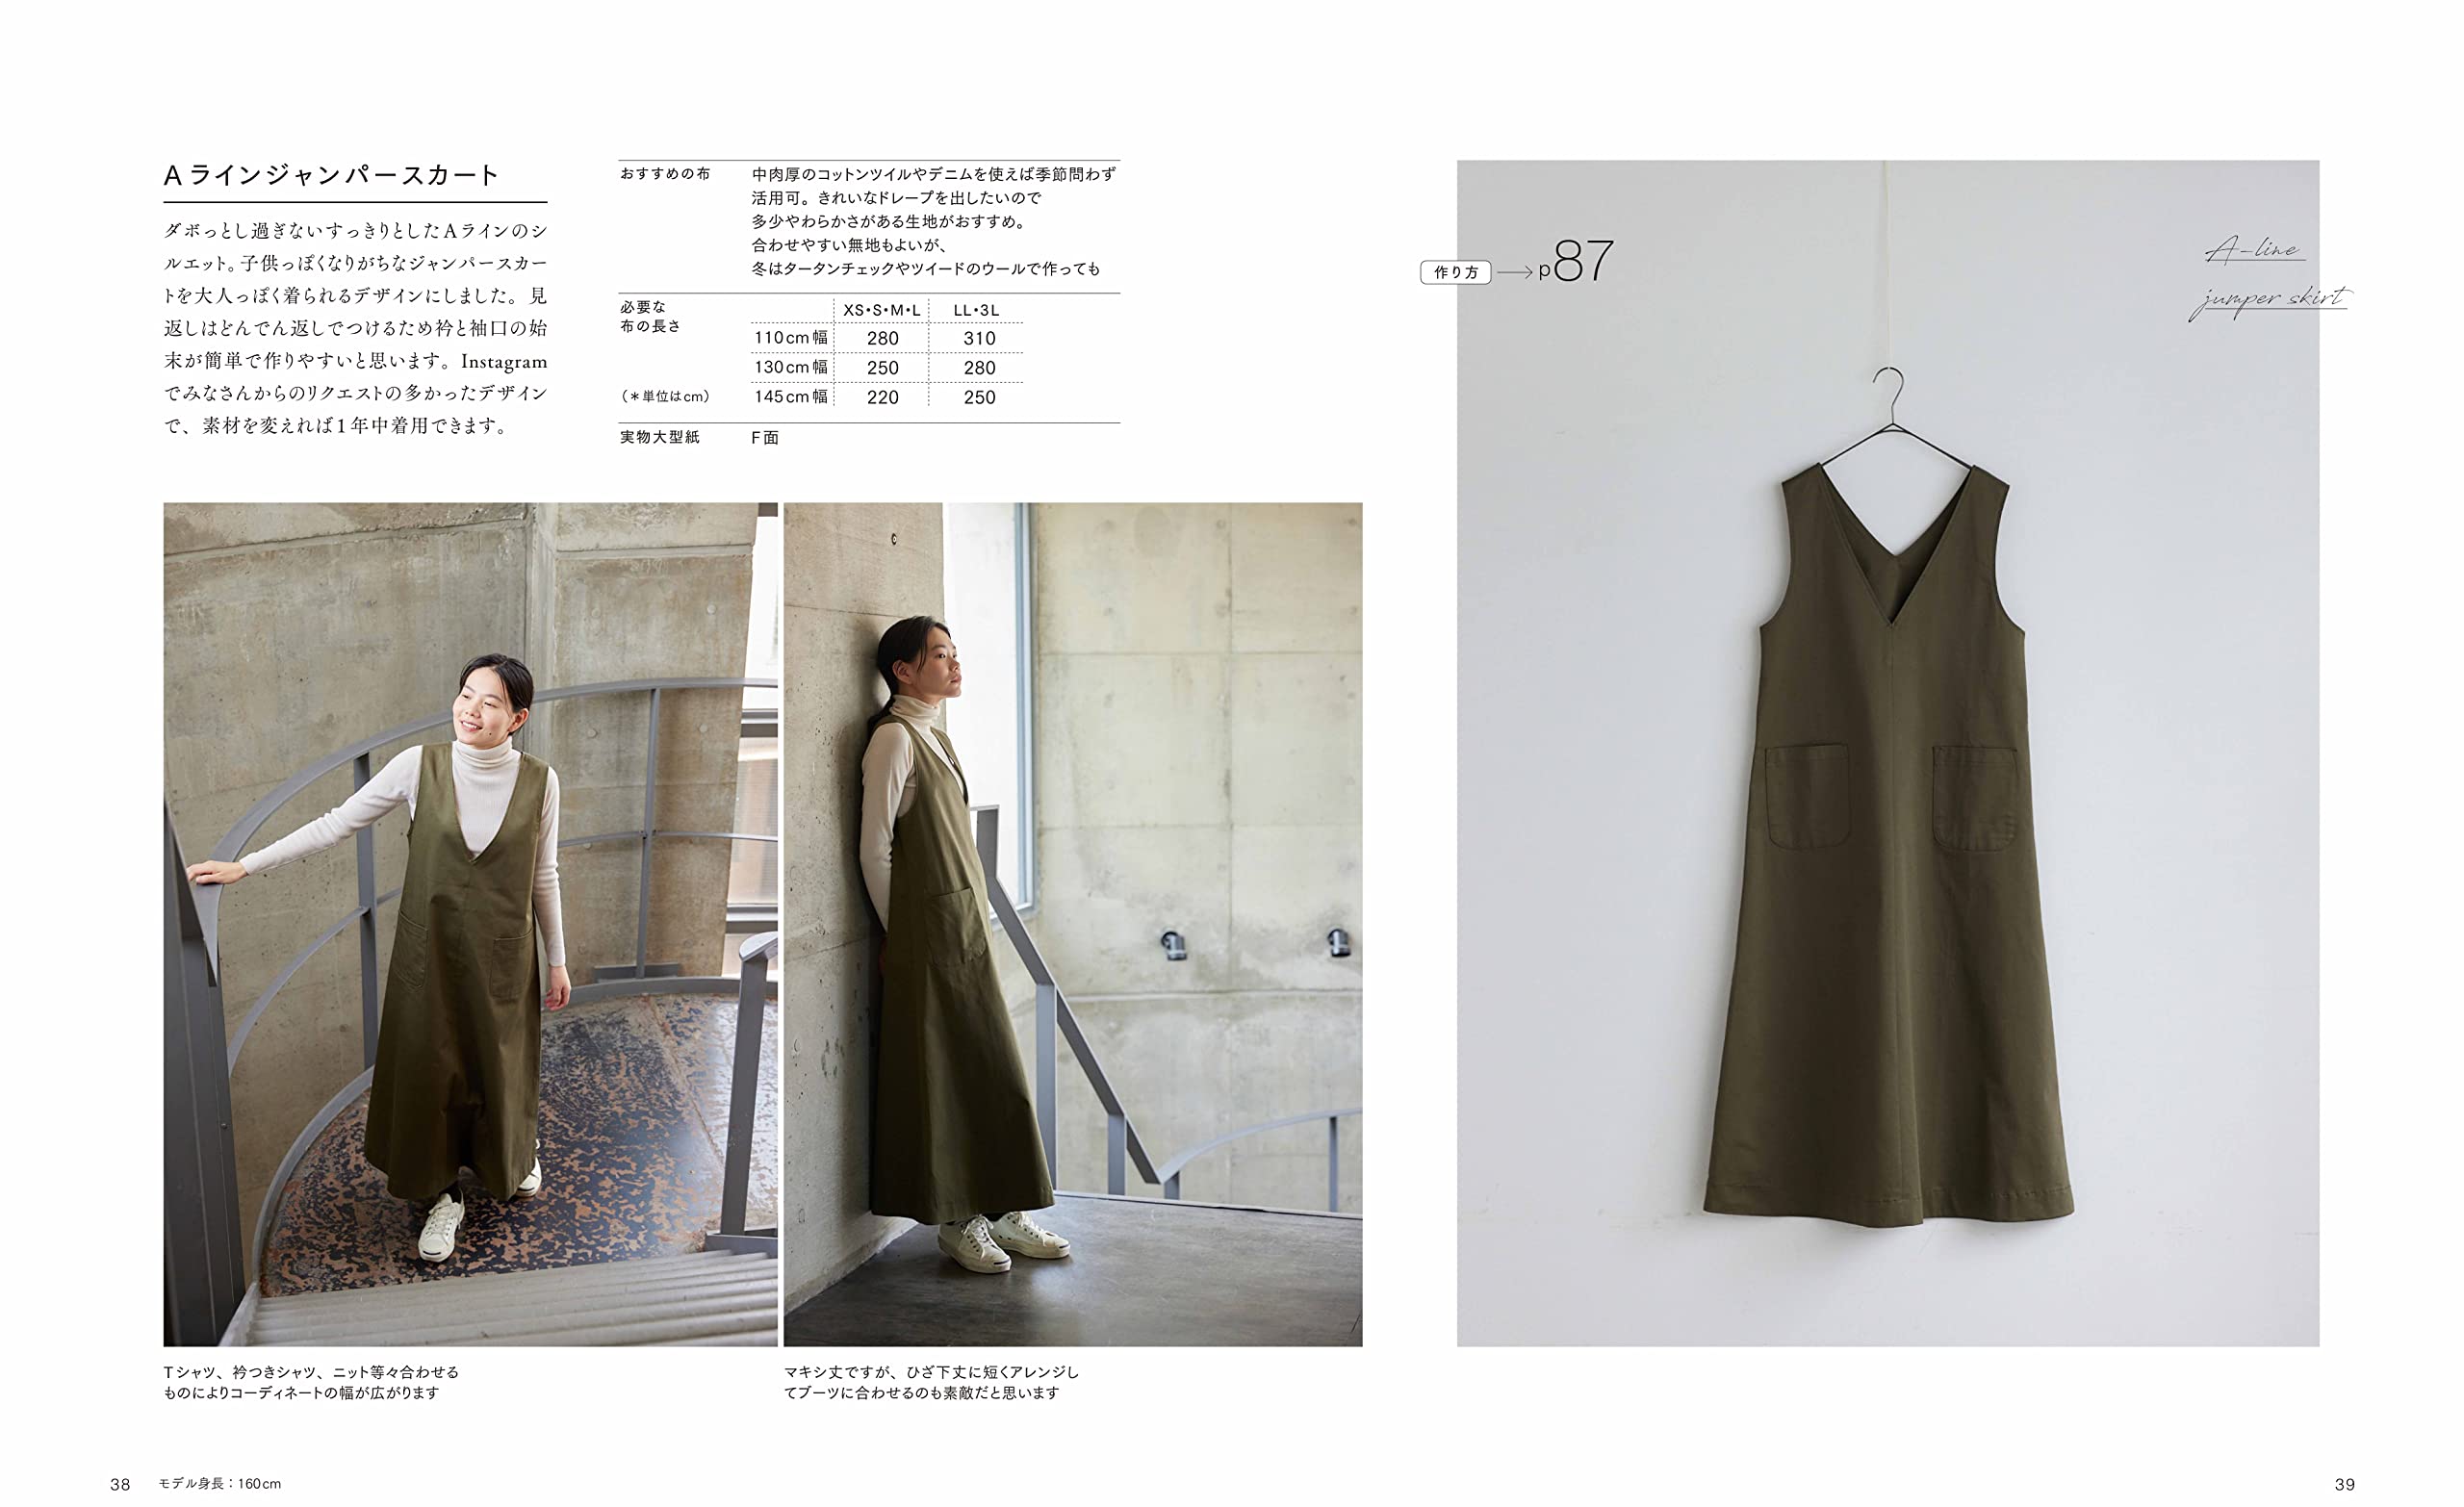 couturier sewing class　おとな服名品図鑑